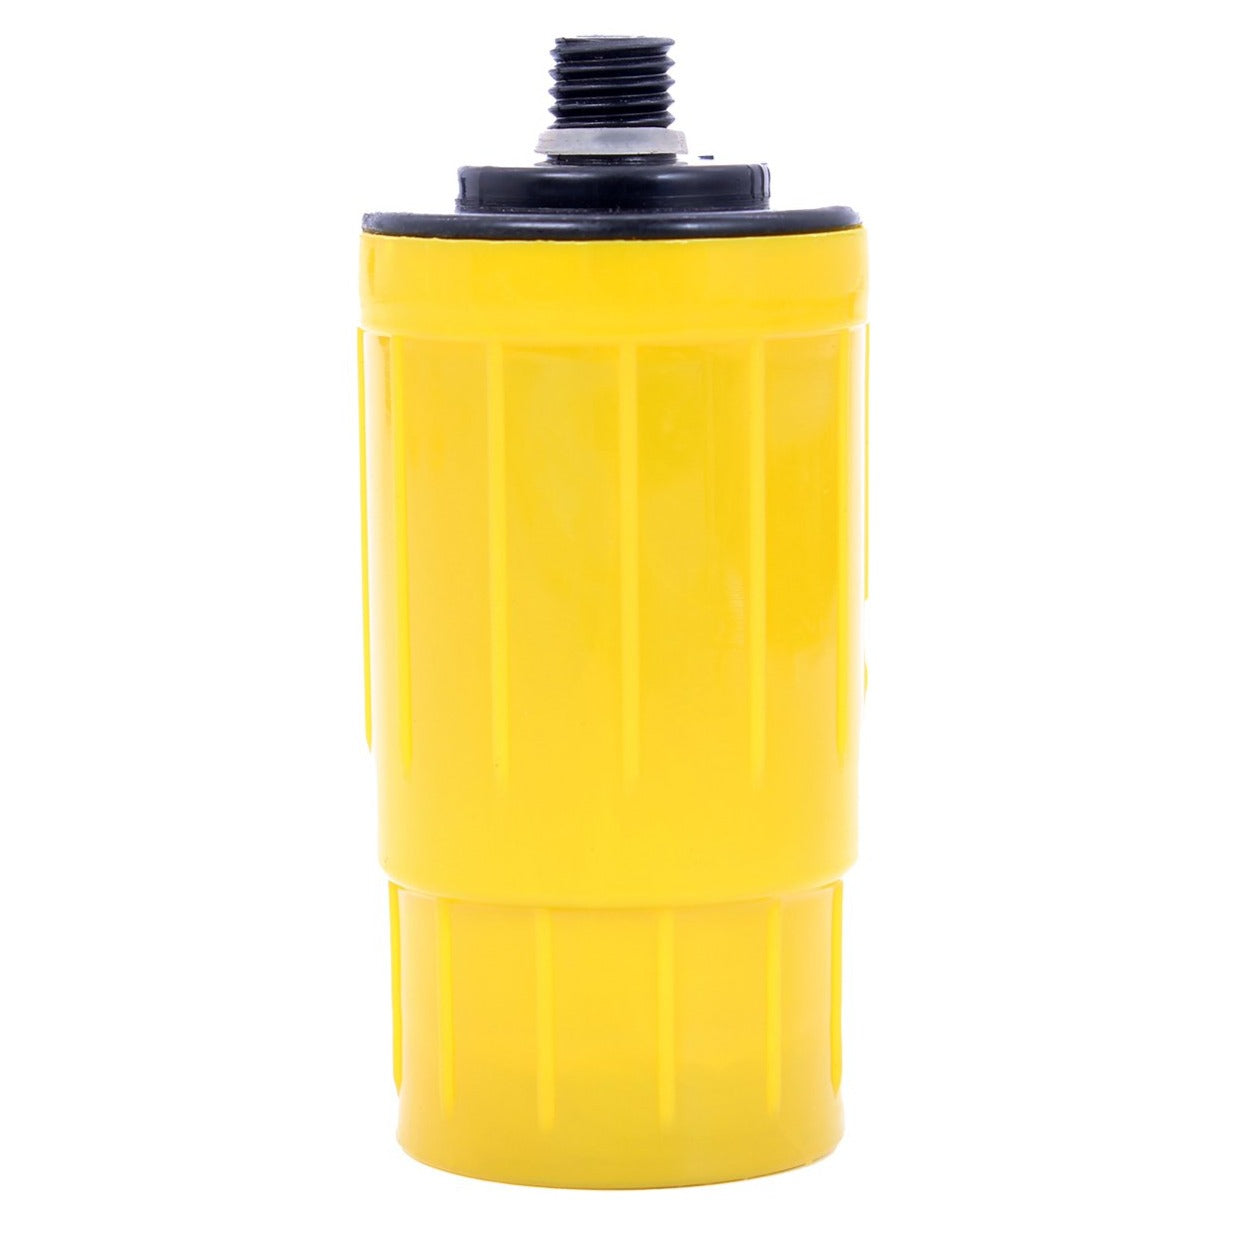 28oz RAD (Radiological) Replacement Filter